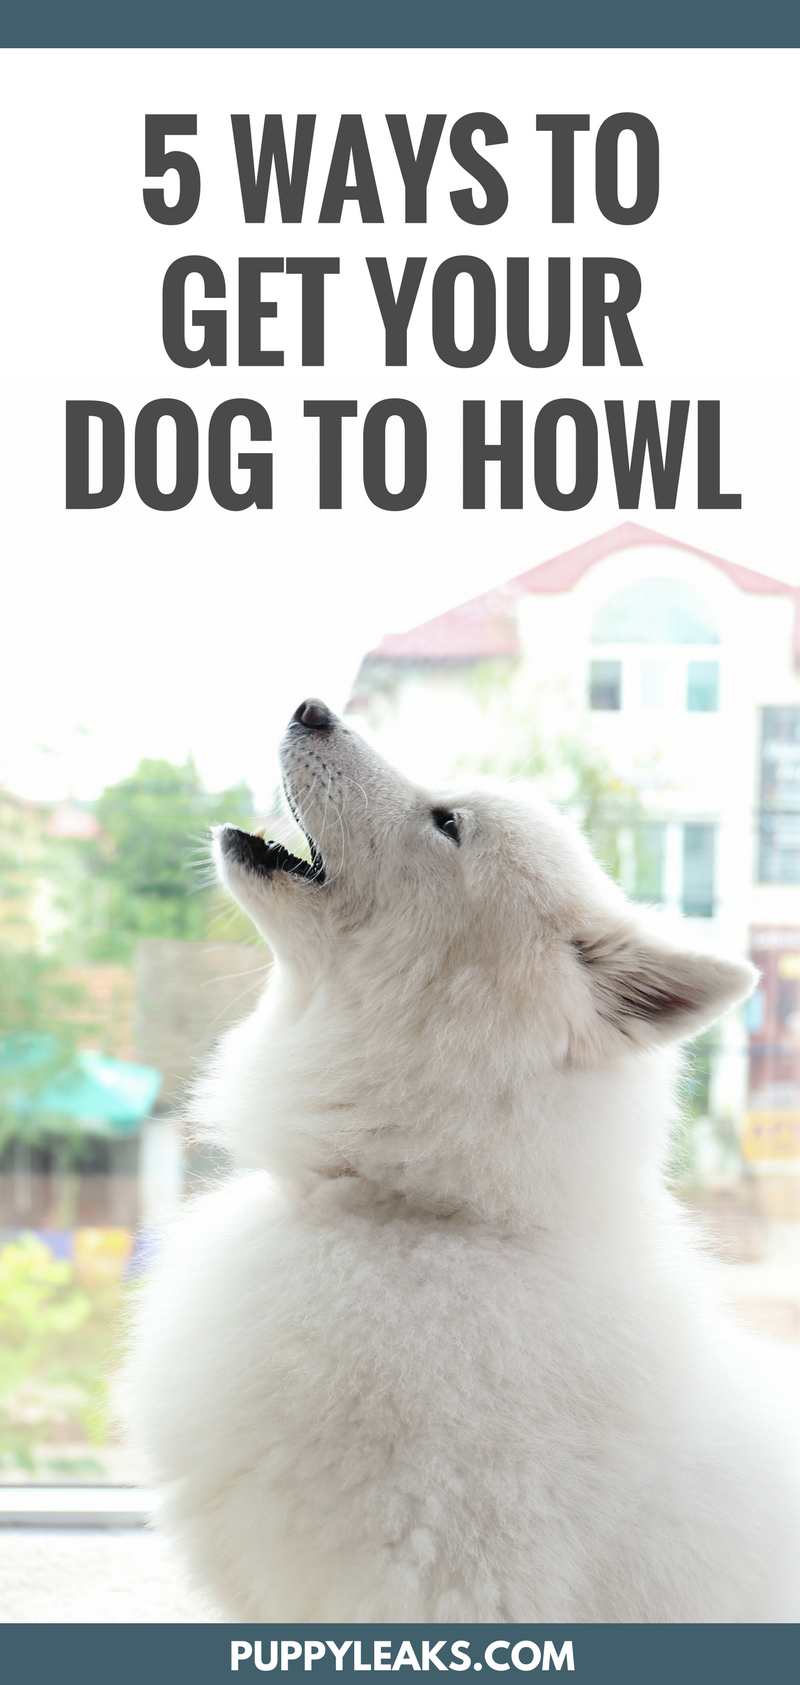 Dog Howling 5 Easy Ways To Make Your Dog Howl Puppy Leaks